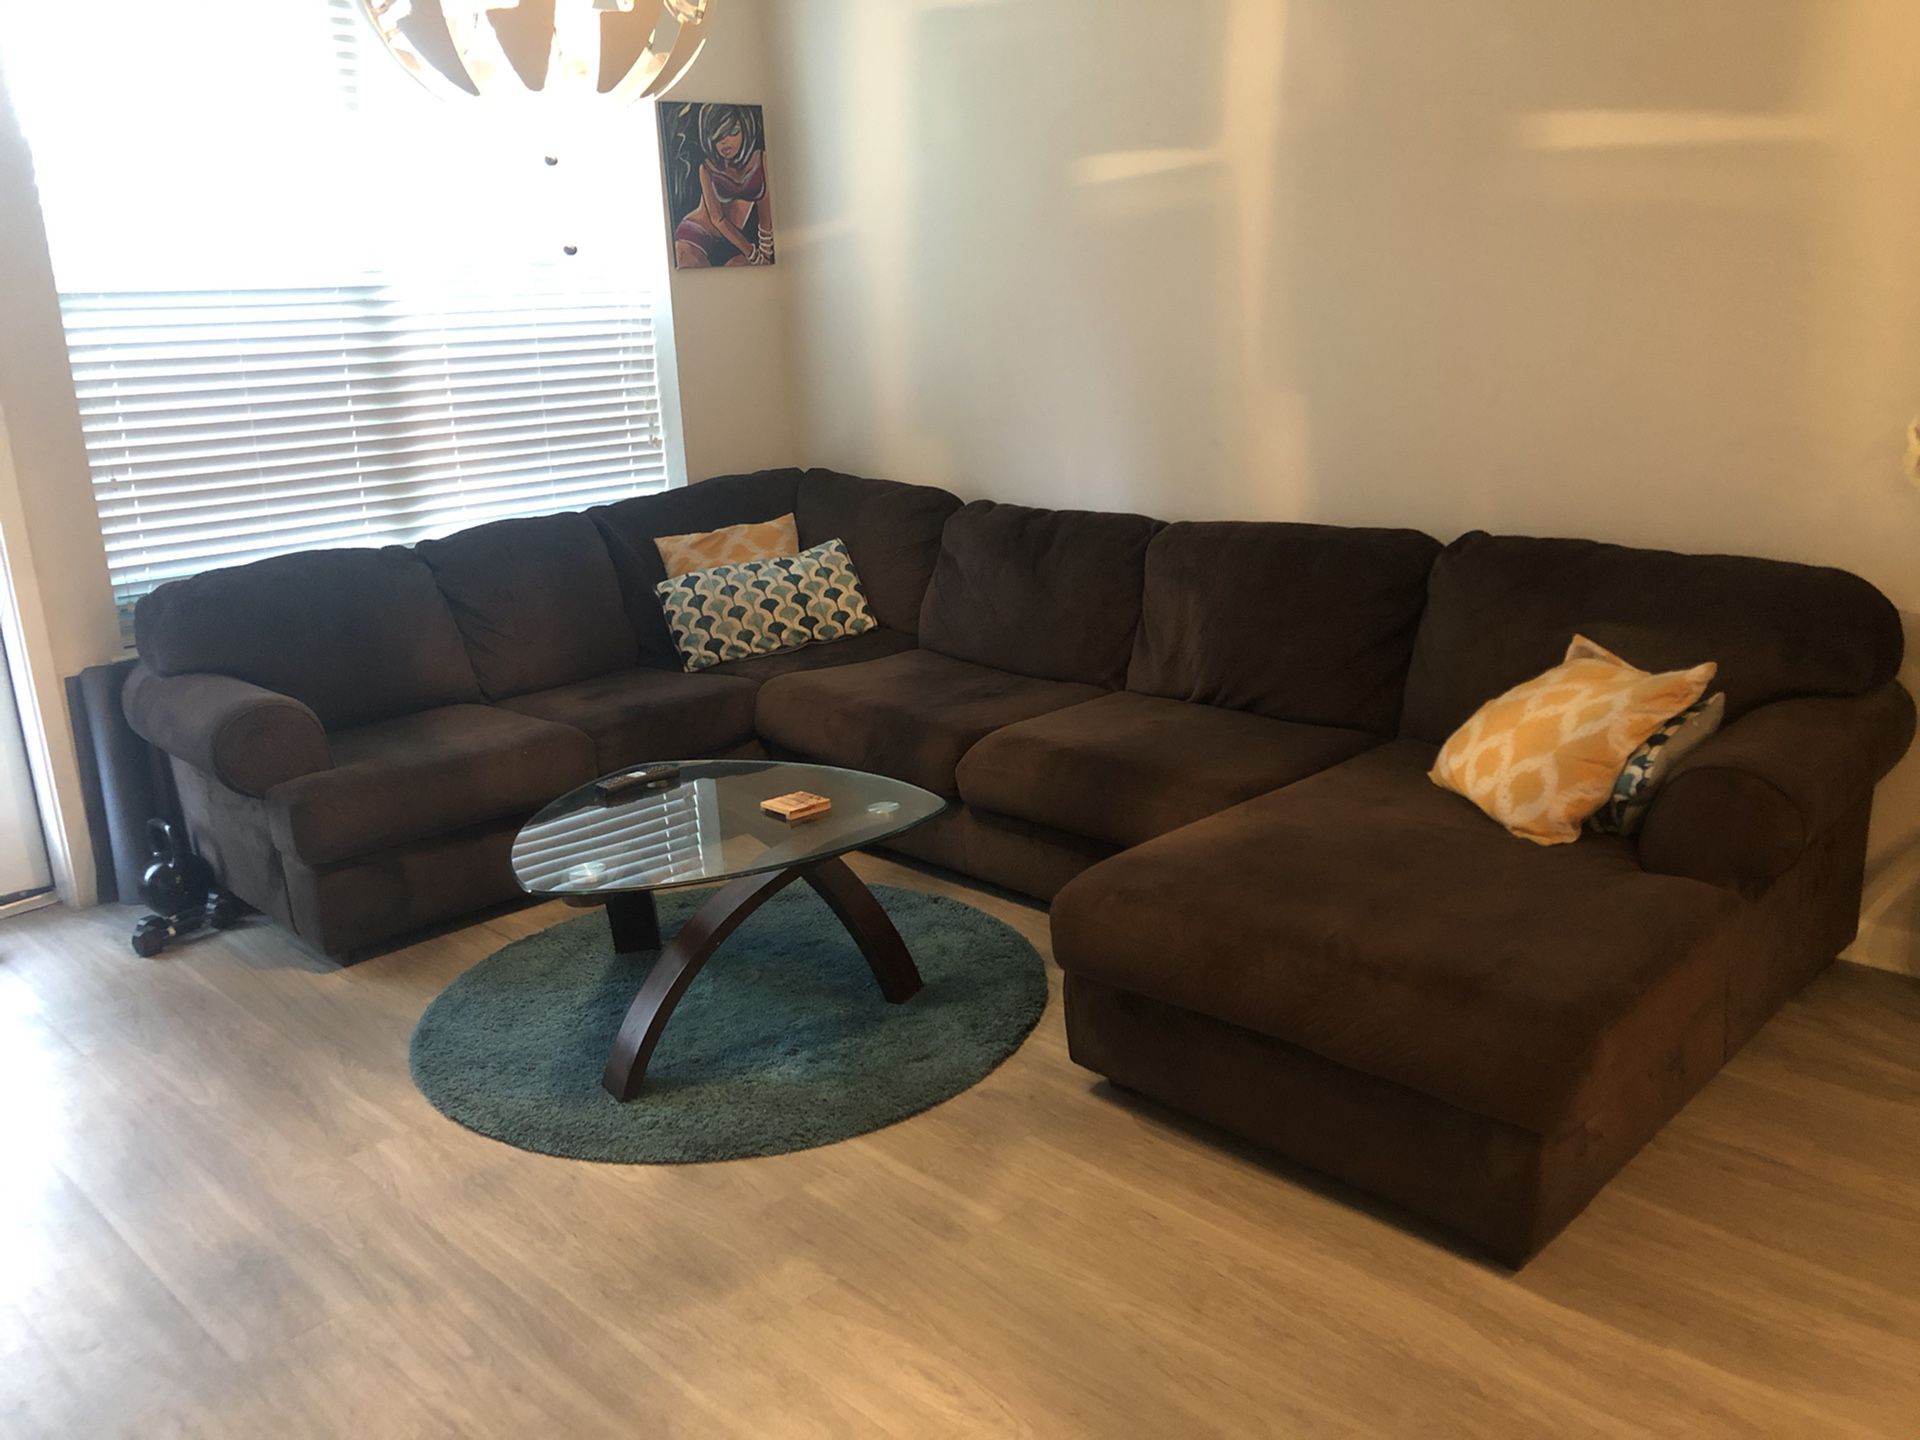 Large sectional couch with coffee table